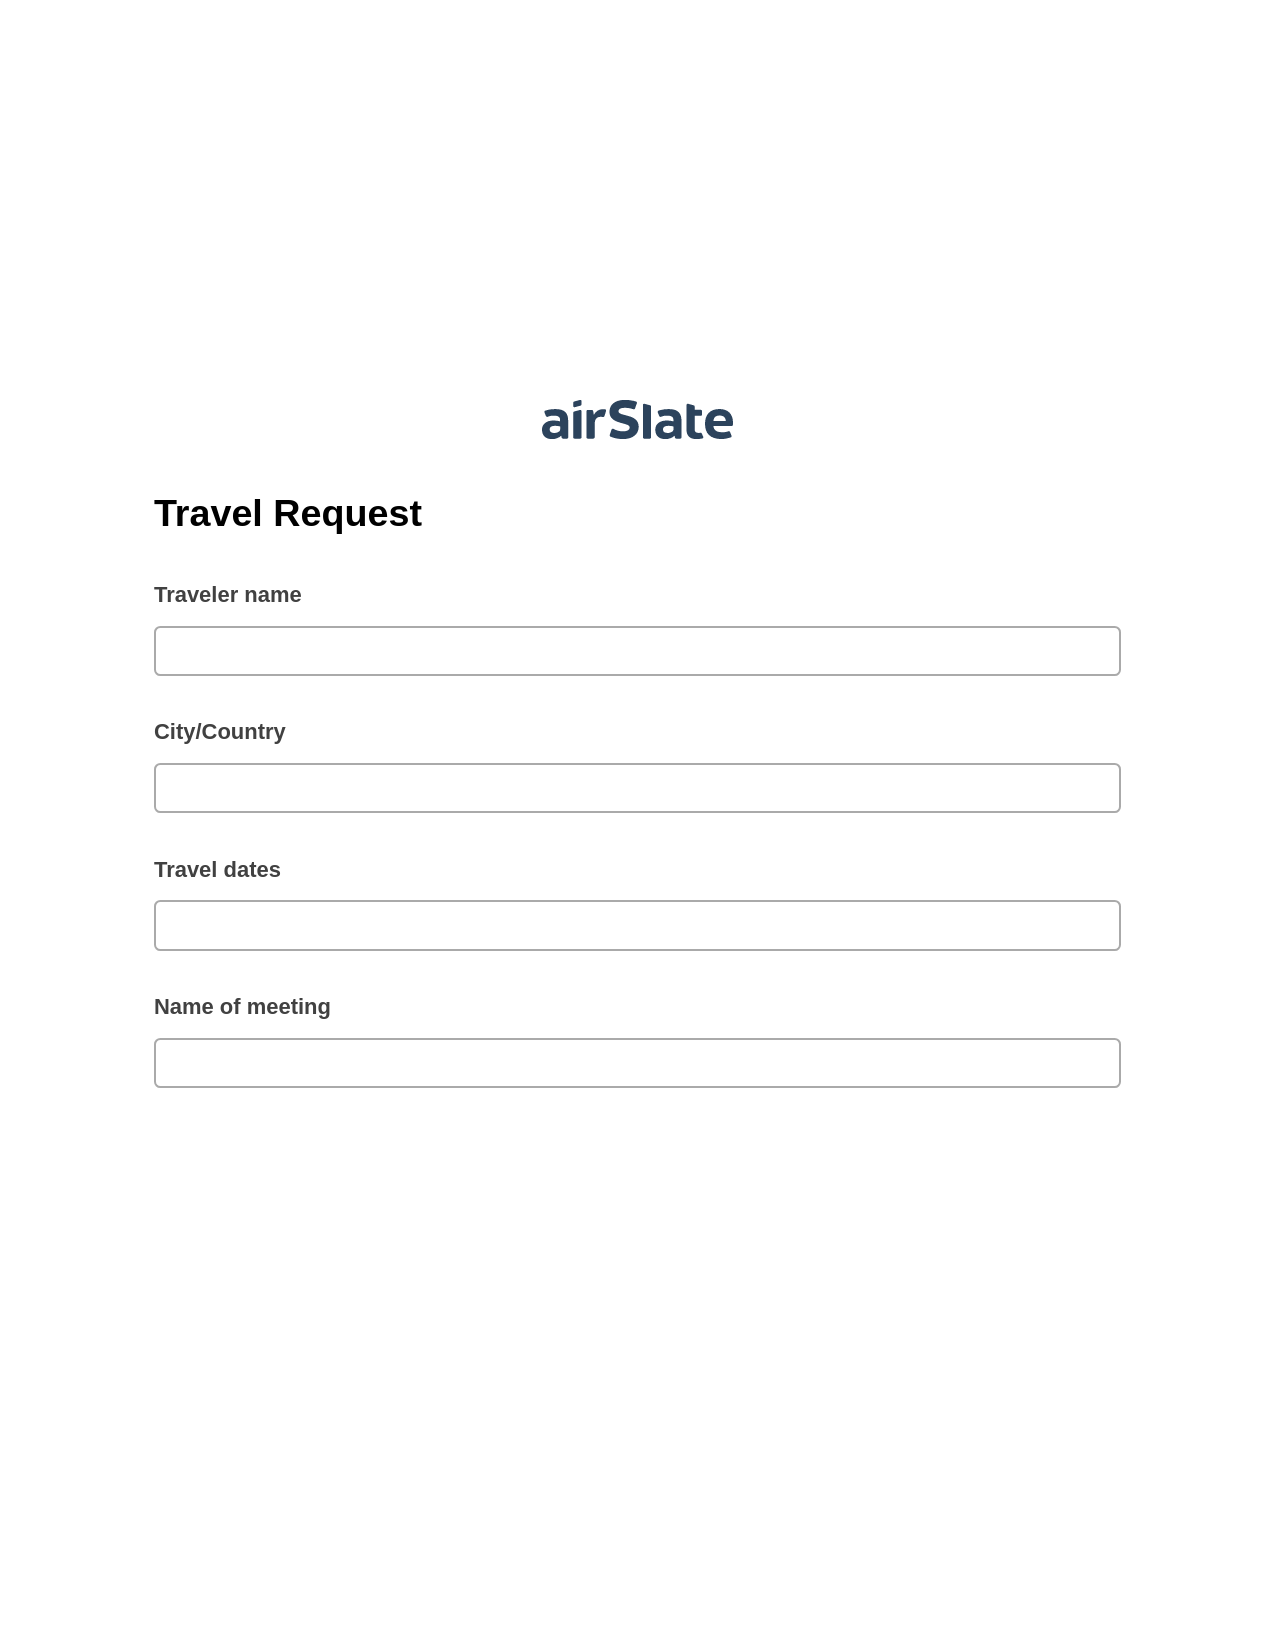 Travel Request Pre-fill Slate from MS Dynamics 365 Records Bot, Webhook Bot, Export to Google Sheet Bot